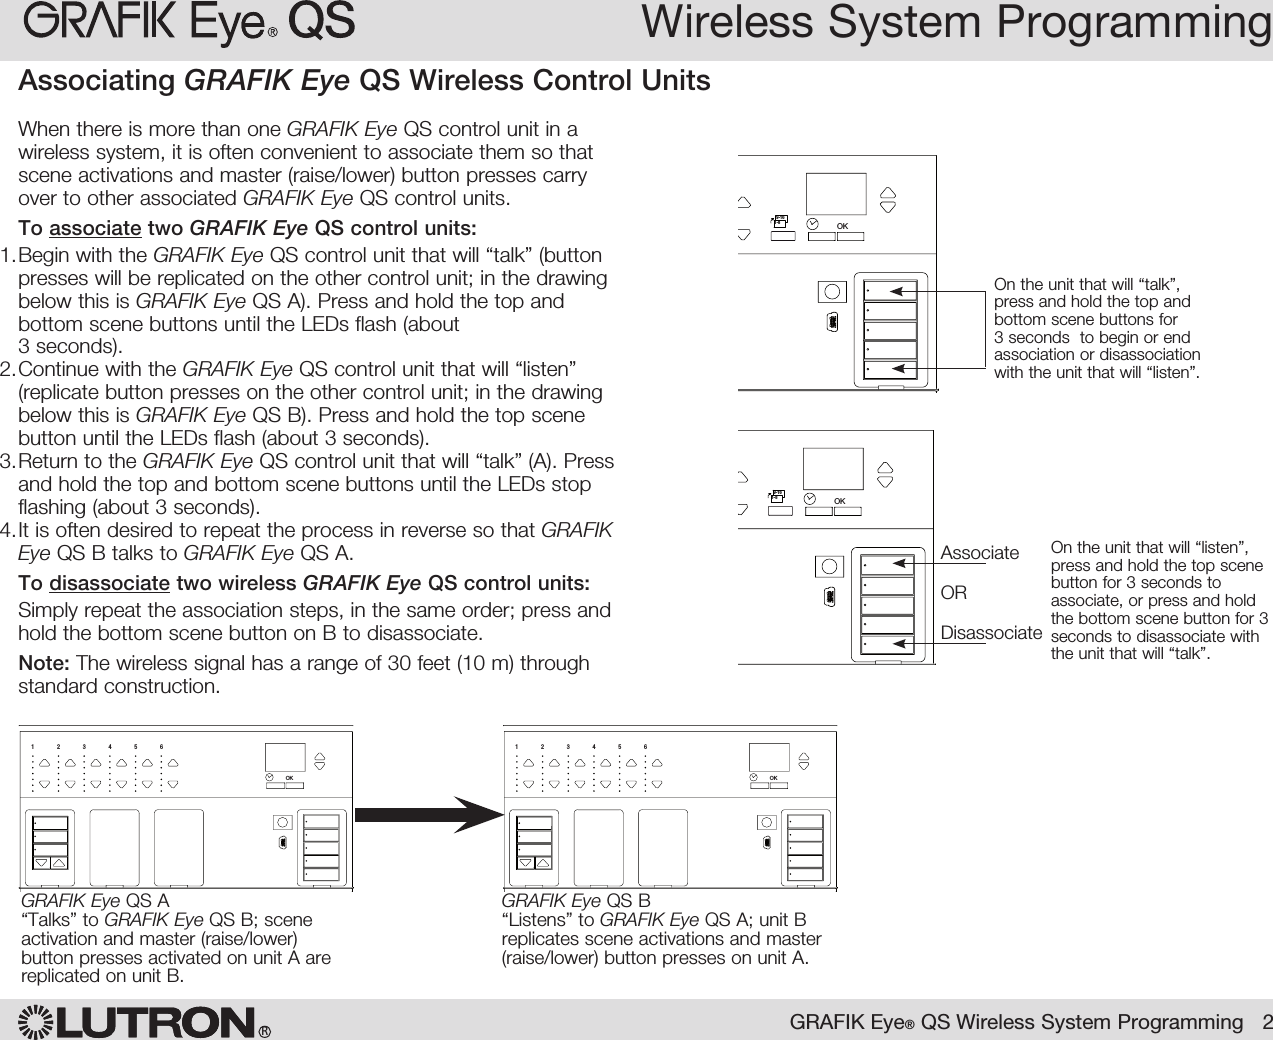 Wireless System ProgrammingRGRAFIK Eye® QS Wireless System Programming   2OK1 2 3 4 5 6OK1 2 3 4 5 6GRAFIK Eye QS A“Talks” to GRAFIK Eye QS B; scene activation and master (raise/lower) button presses activated on unit A are replicated on unit B.GRAFIK Eye QS B“Listens” to GRAFIK Eye QS A; unit B replicates scene activations and master (raise/lower) button presses on unit A.When there is more than one GRAFIK Eye QS control unit in a wireless system, it is often convenient to associate them so that scene activations and master (raise/lower) button presses carry over to other associated GRAFIK Eye QS control units.To associate two GRAFIK Eye QS control units:1. Begin with the GRAFIK Eye QS control unit that will “talk” (button presses will be replicated on the other control unit; in the drawing below this is GRAFIK Eye QS A). Press and hold the top and bottom scene buttons until the LEDs flash (about  3 seconds).2. Continue with the GRAFIK Eye QS control unit that will “listen” (replicate button presses on the other control unit; in the drawing below this is GRAFIK Eye QS B). Press and hold the top scene button until the LEDs flash (about 3 seconds).3. Return to the GRAFIK Eye QS control unit that will “talk” (A). Press and hold the top and bottom scene buttons until the LEDs stop flashing (about 3 seconds).4. It is often desired to repeat the process in reverse so that GRAFIK Eye QS B talks to GRAFIK Eye QS A.To disassociate two wireless GRAFIK Eye QS control units:Simply repeat the association steps, in the same order; press and hold the bottom scene button on B to disassociate.Note: The wireless signal has a range of 30 feet (10 m) through standard construction.Associating GRAFIK Eye QS Wireless Control UnitsOK1 2 34569 10 11 12 13 14 7815 169-161-8On the unit that will “talk”, press and hold the top and bottom scene buttons for 3 seconds  to begin or end association or disassociation with the unit that will “listen”.OK1 2 34569 10 11 12 13 14 7815 169-161-8On the unit that will “listen”, press and hold the top scene button for 3 seconds to associate, or press and hold the bottom scene button for 3 seconds to disassociate with the unit that will “talk”.AssociateORDisassociate